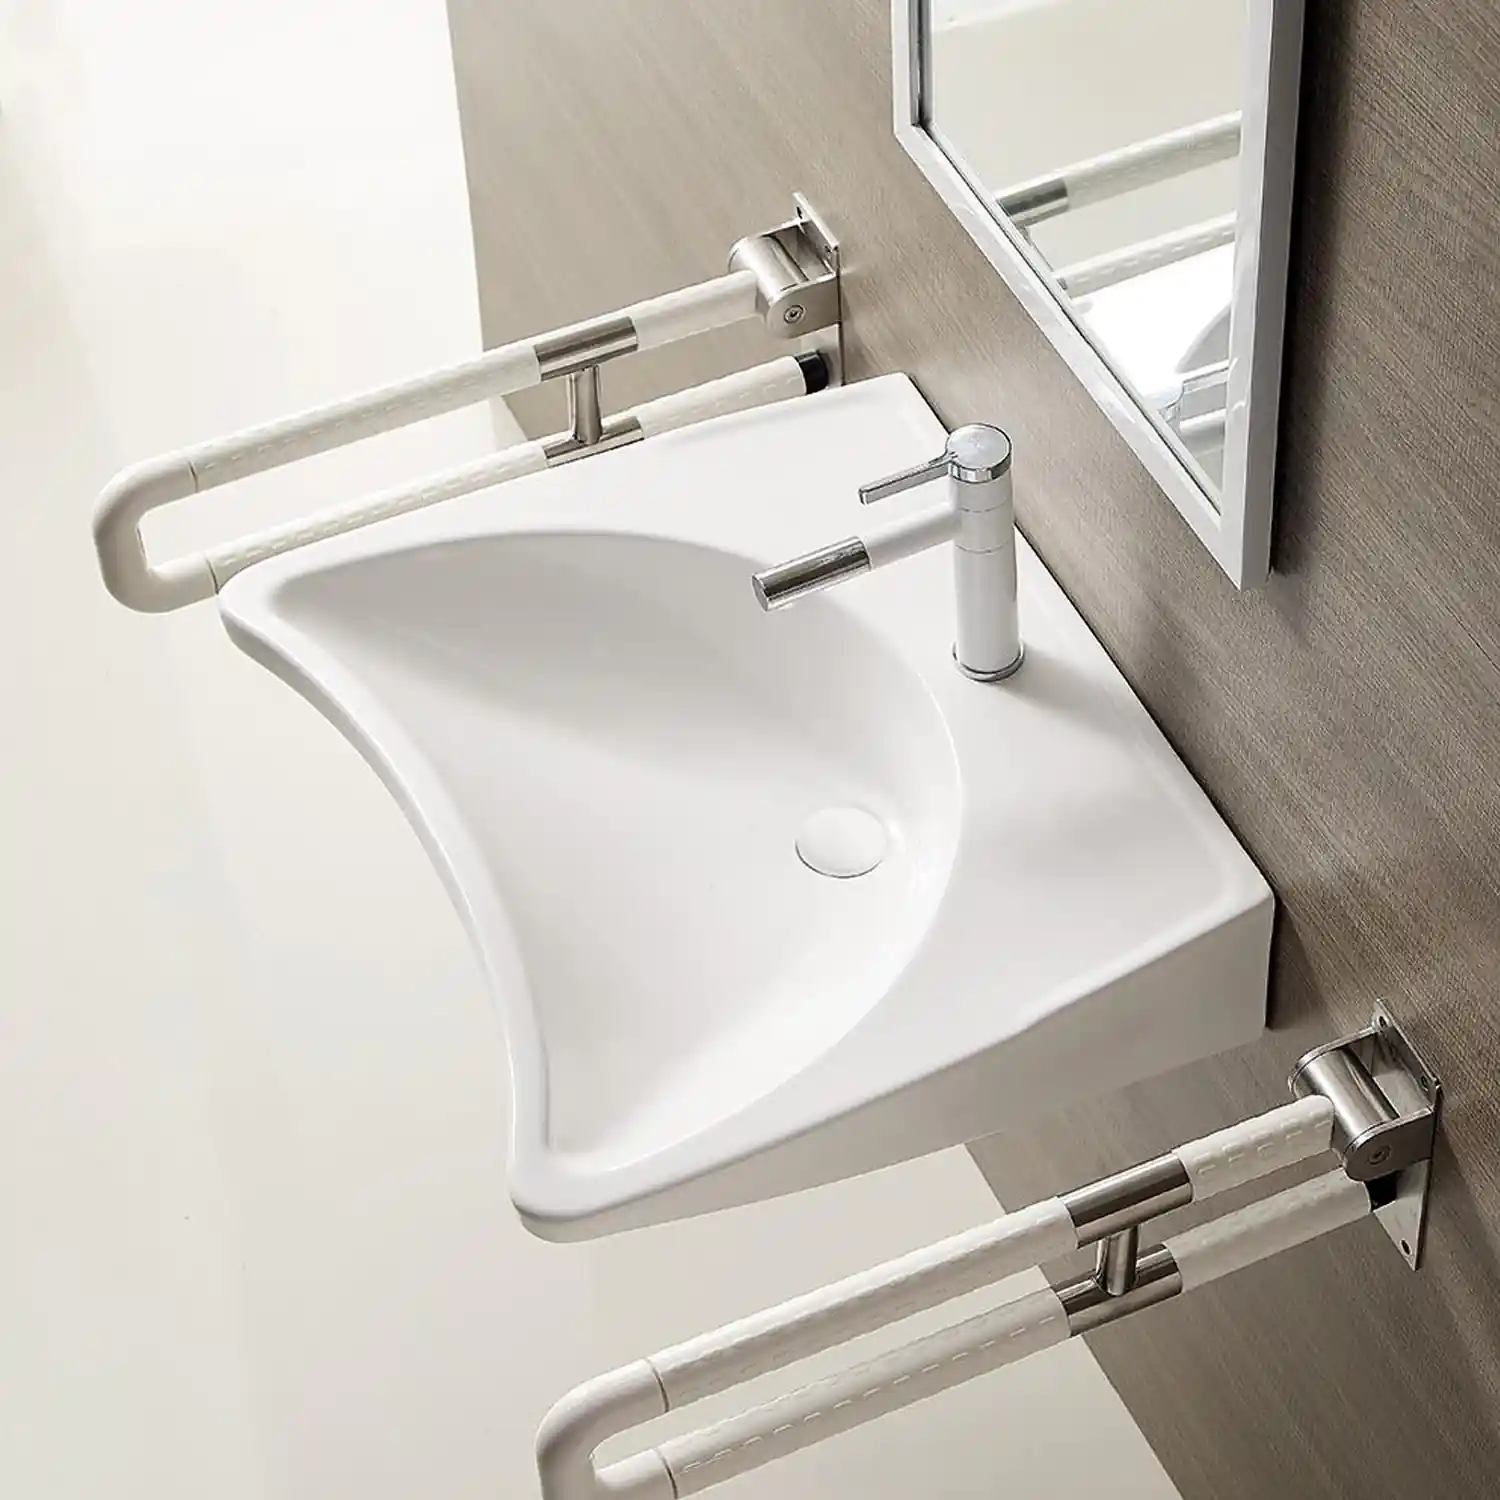 wall-mount ceramic 25 inch wheelchair accessible bathroom sink for disabled, compliant with any barrier-free bathroom settings.